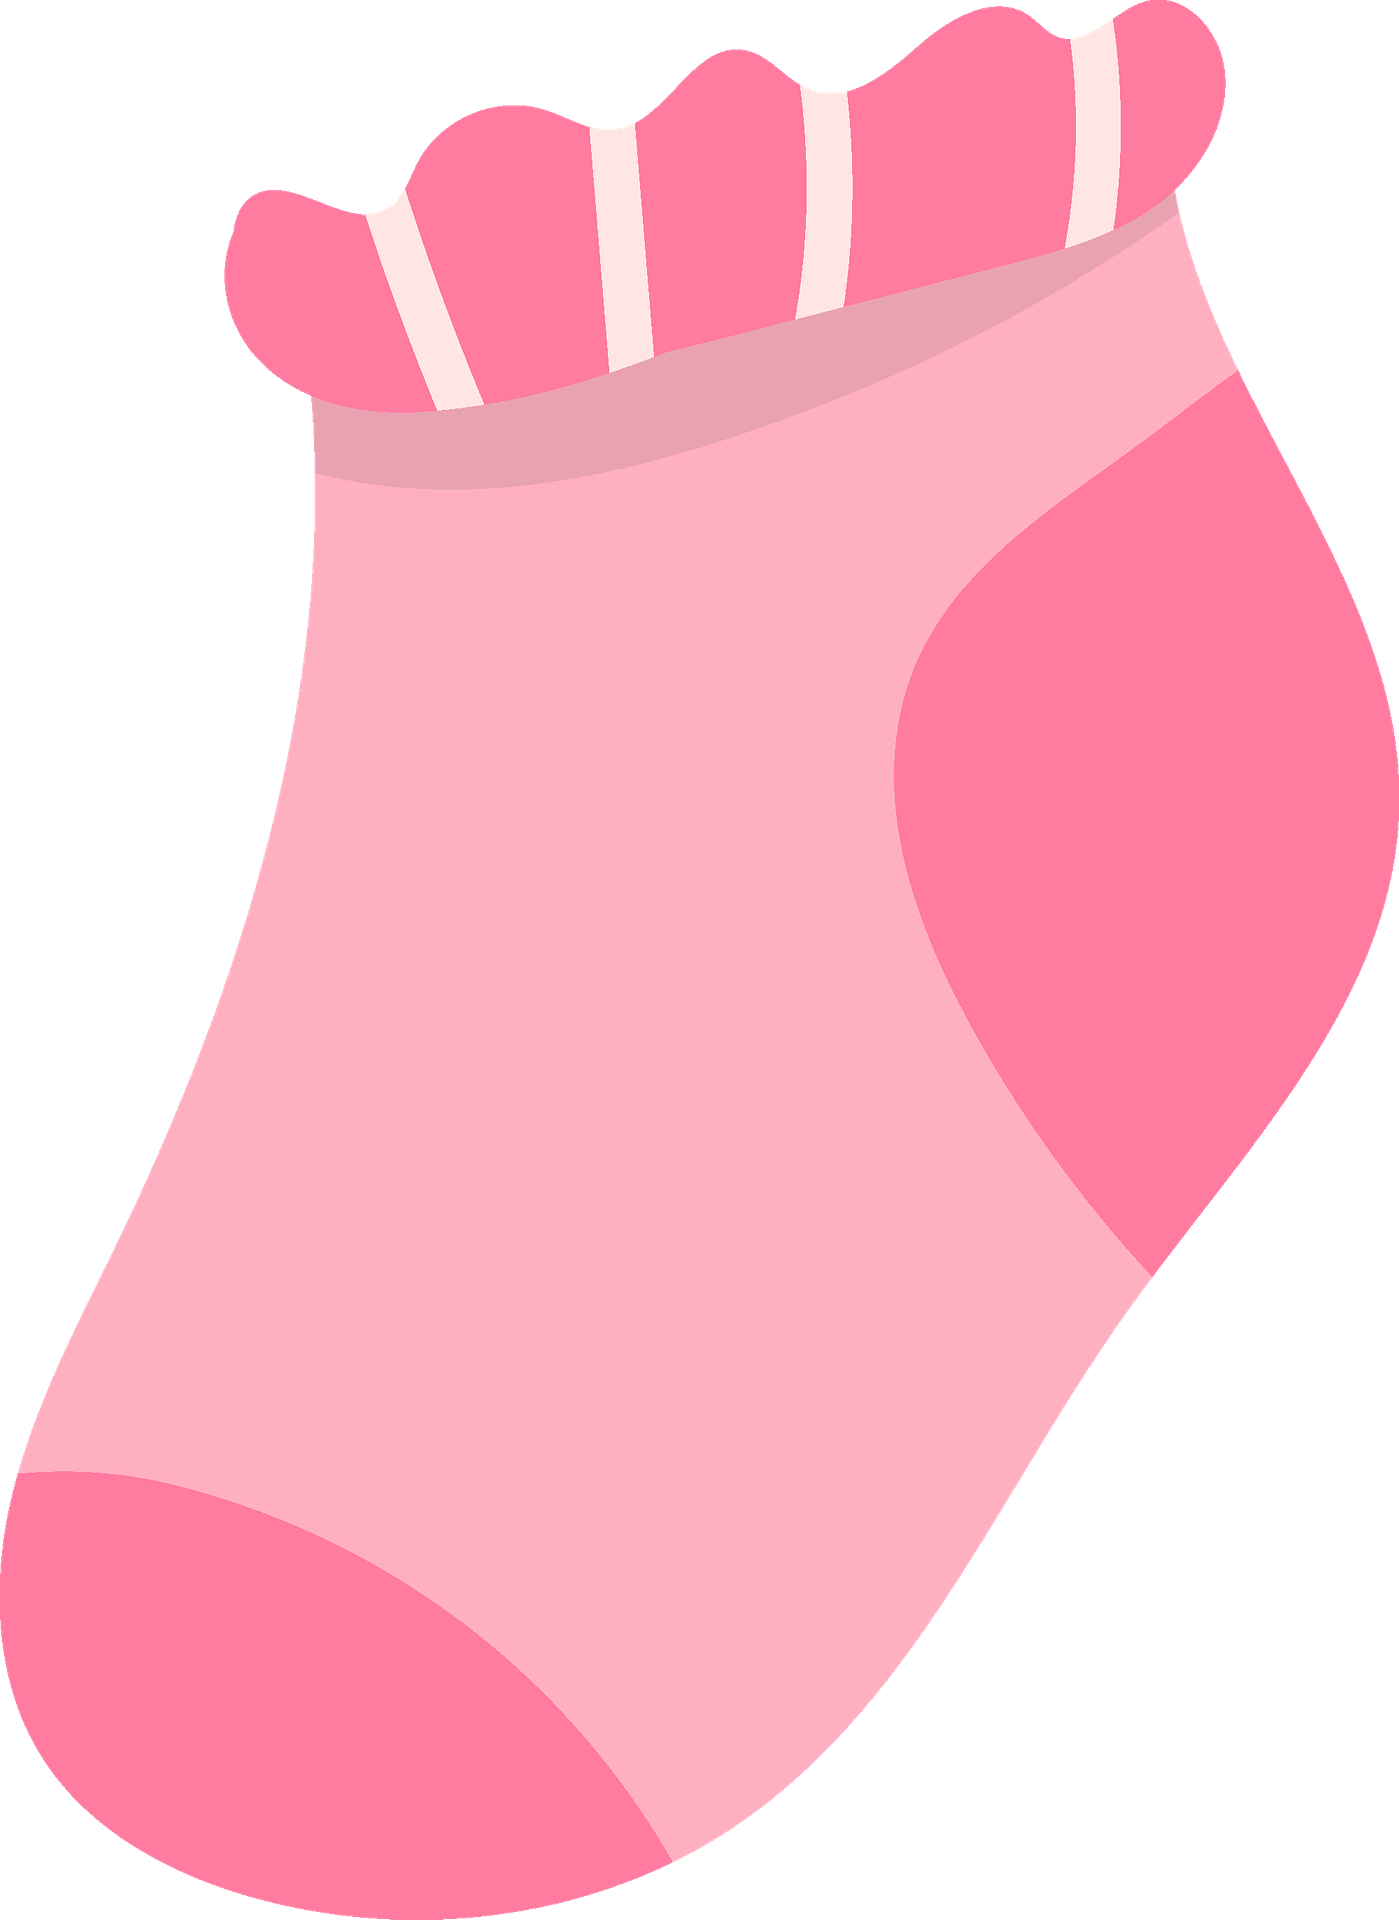 Fragile Socks Clipart PNG Images | AI Free Download - Pikbest - Clip ...